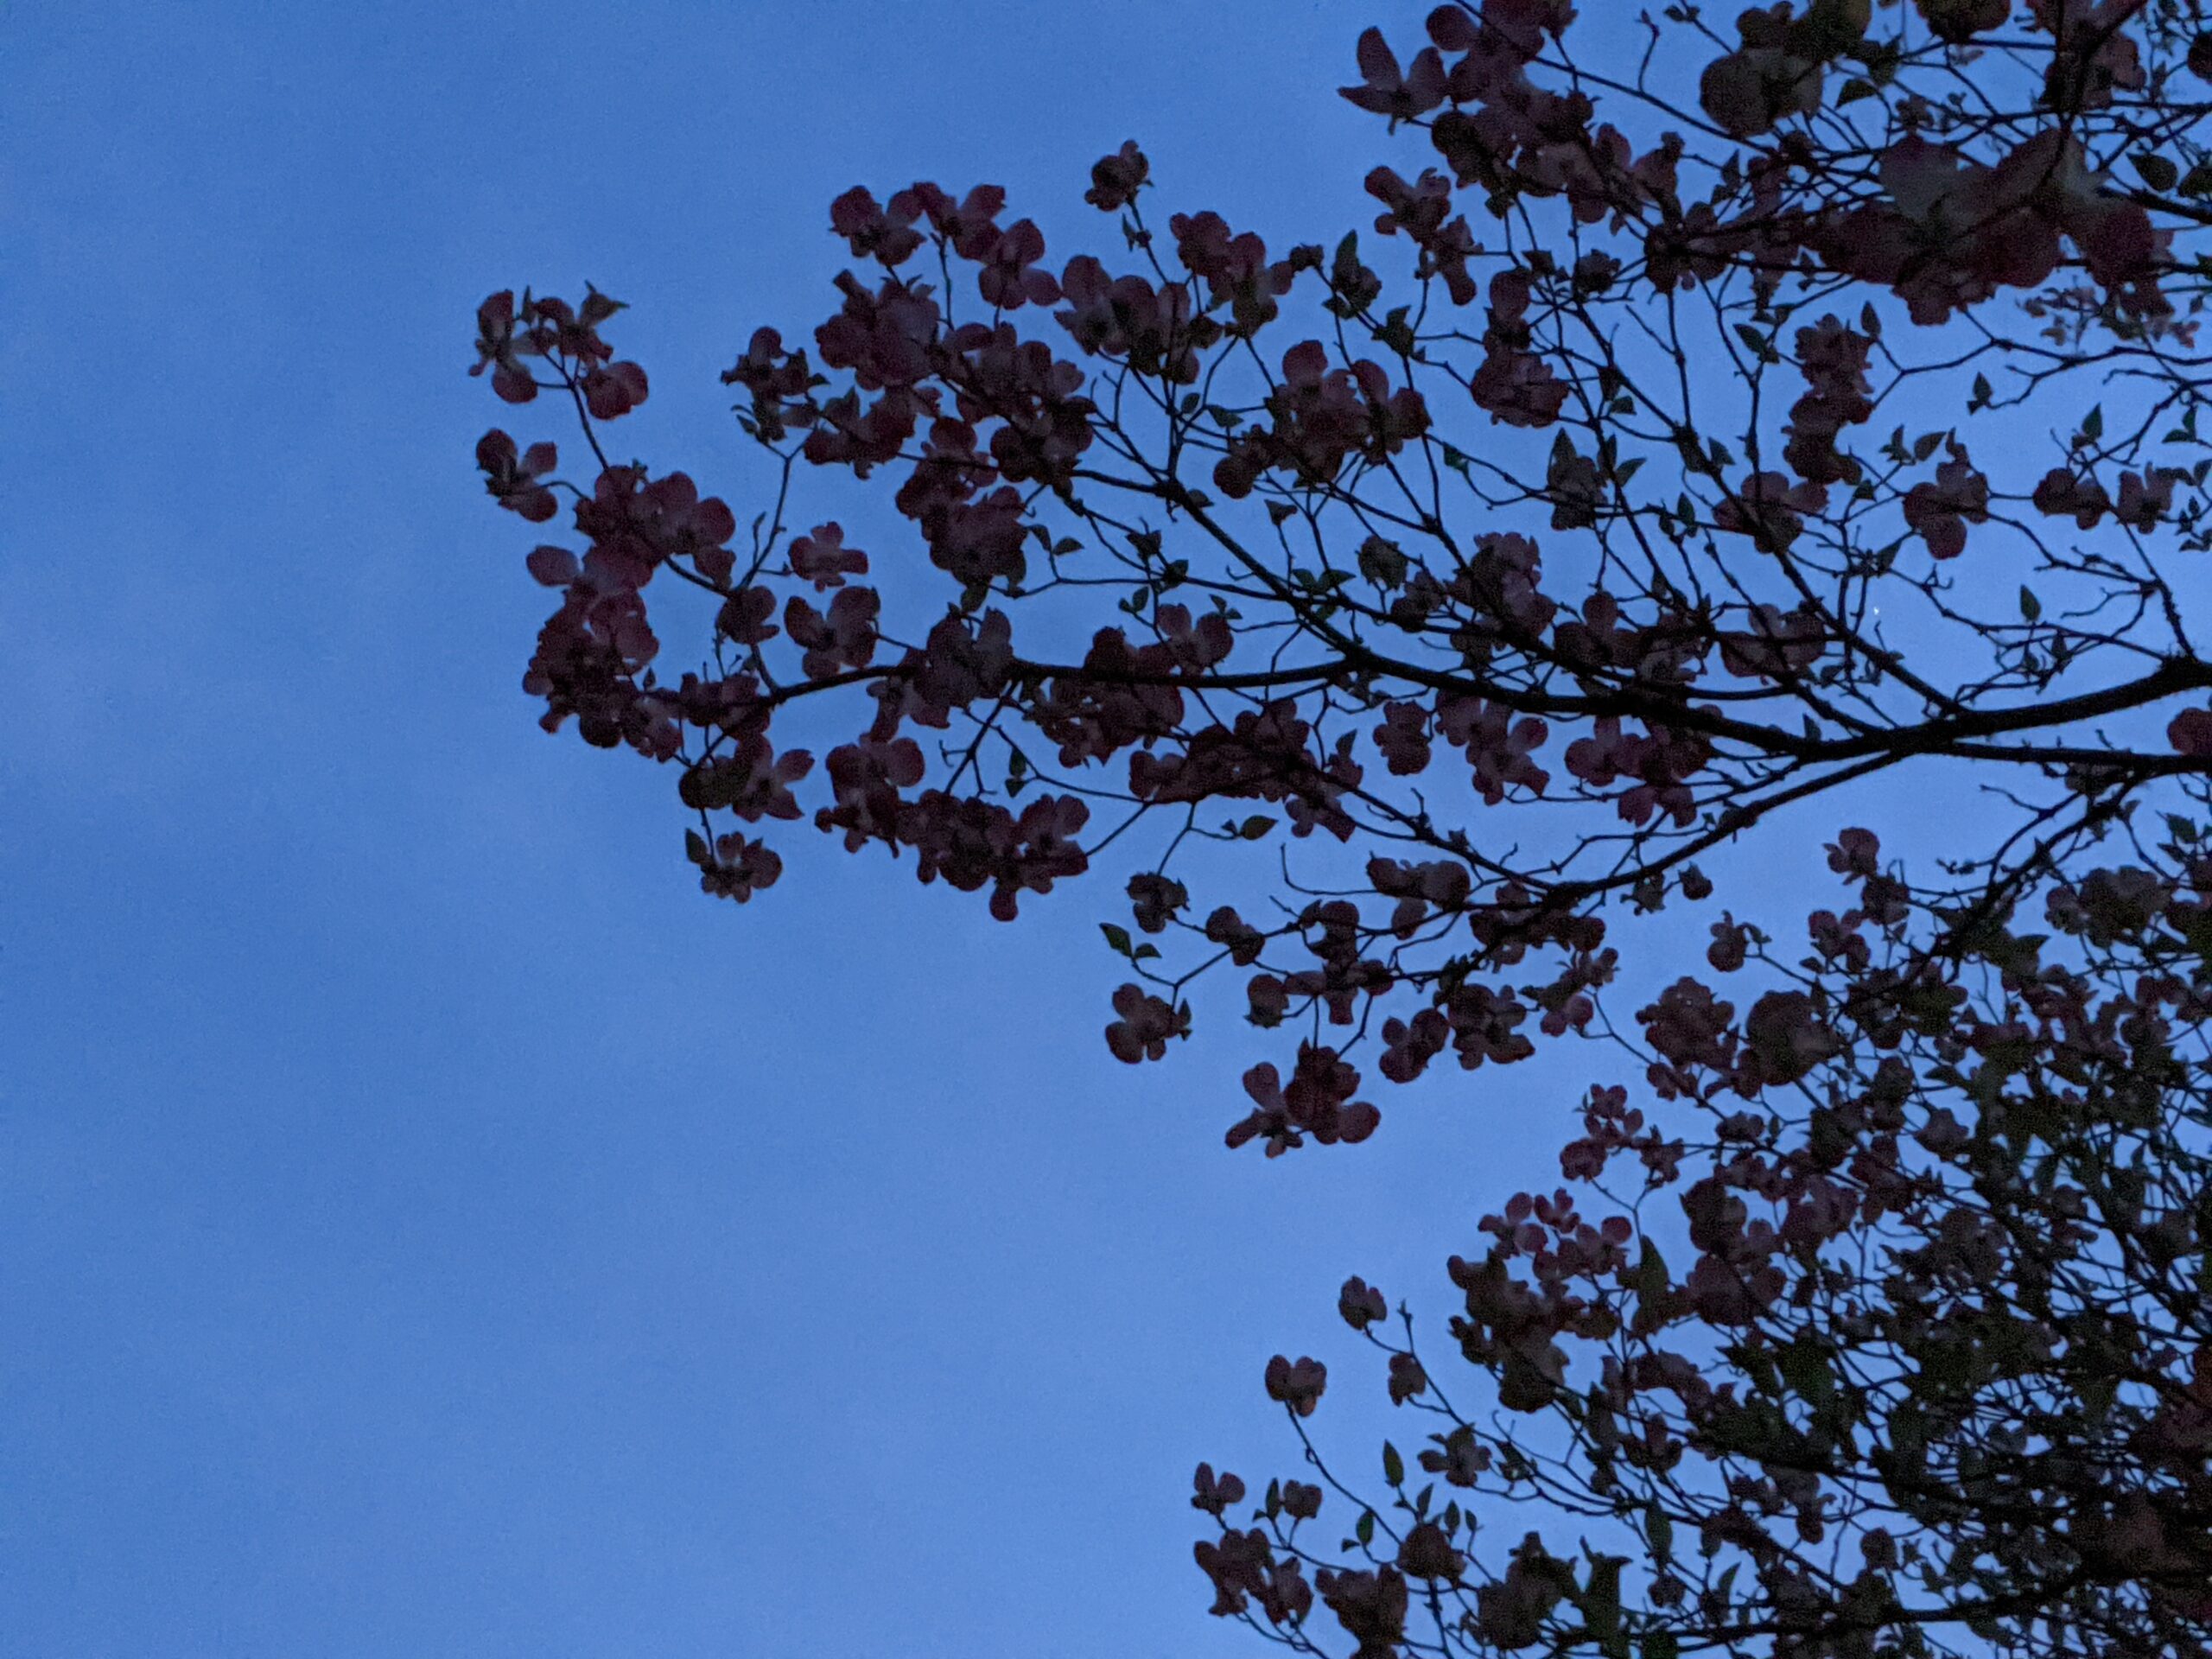 Pink dogwood branches against the evening sky. Jennifer Willis, 2021.